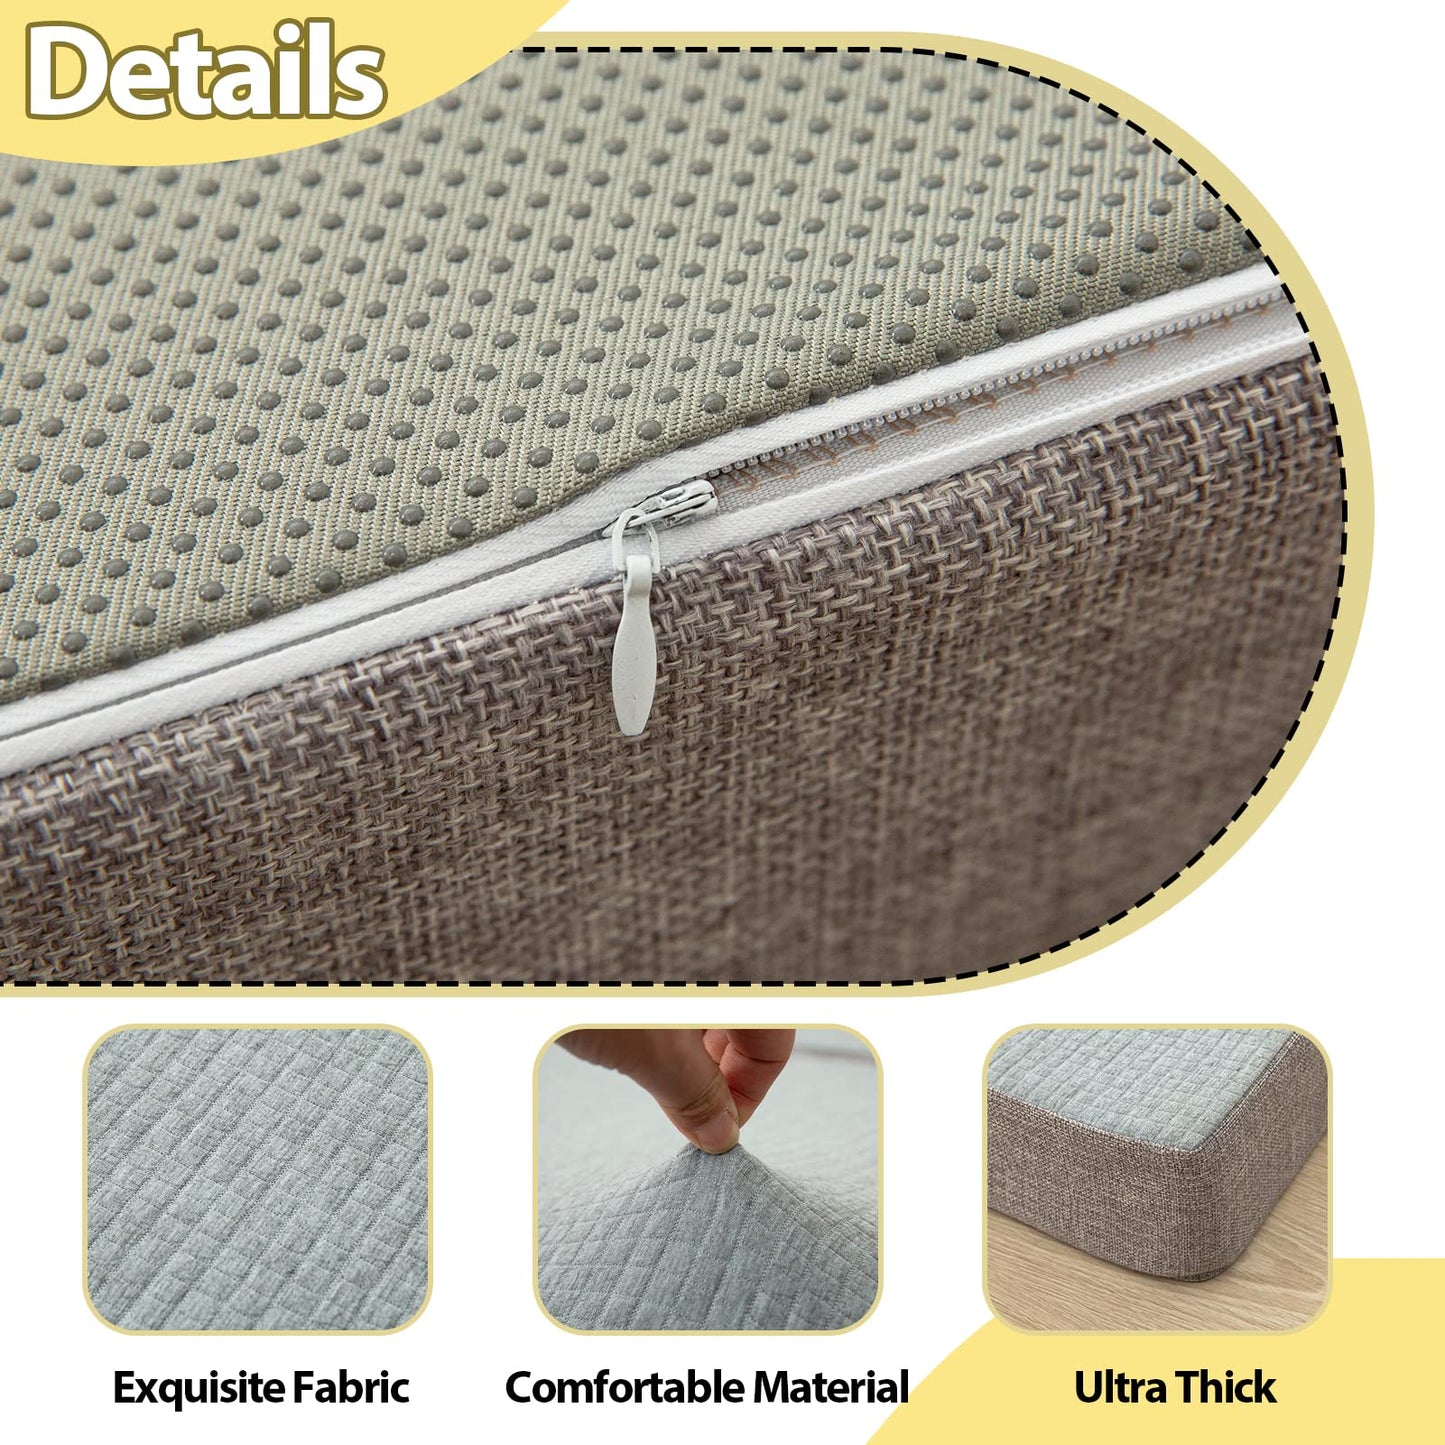 MAXYOYO Folding Mattress, 15cm Tri Fold Floor Mattress with Washable Cover, Foldable in Three,Space-Saving for Guest